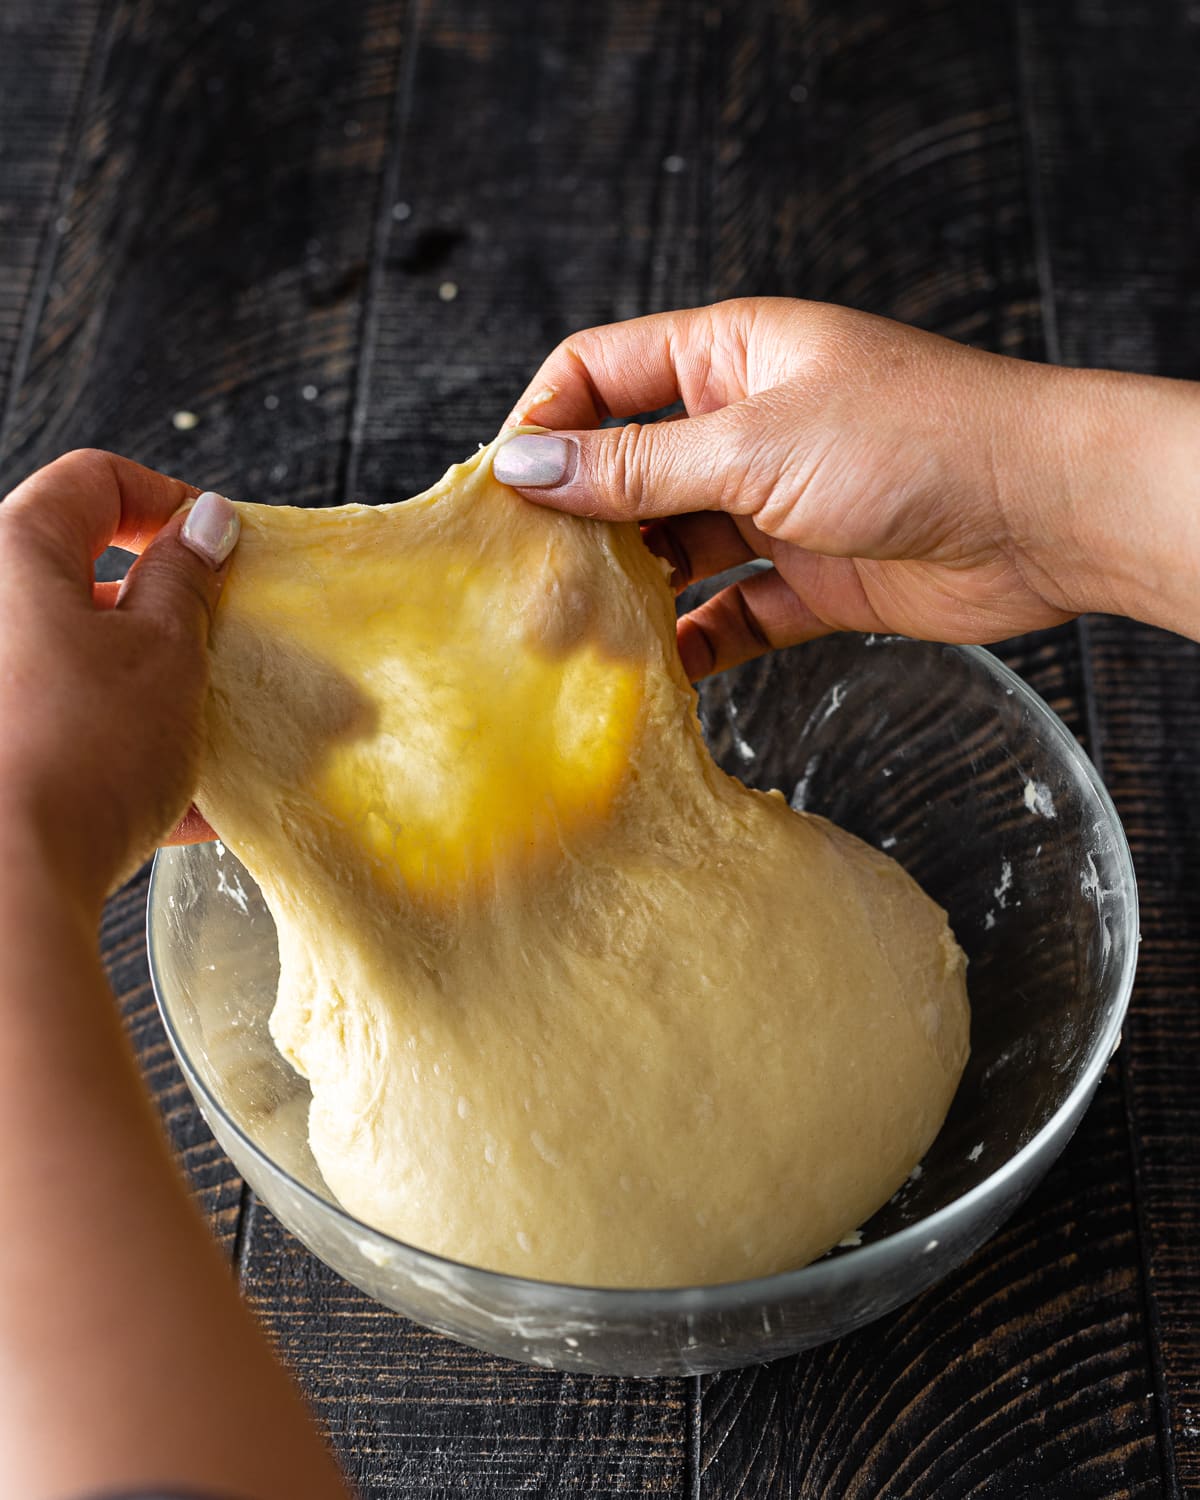 hands stretching dough out thinly until translucent